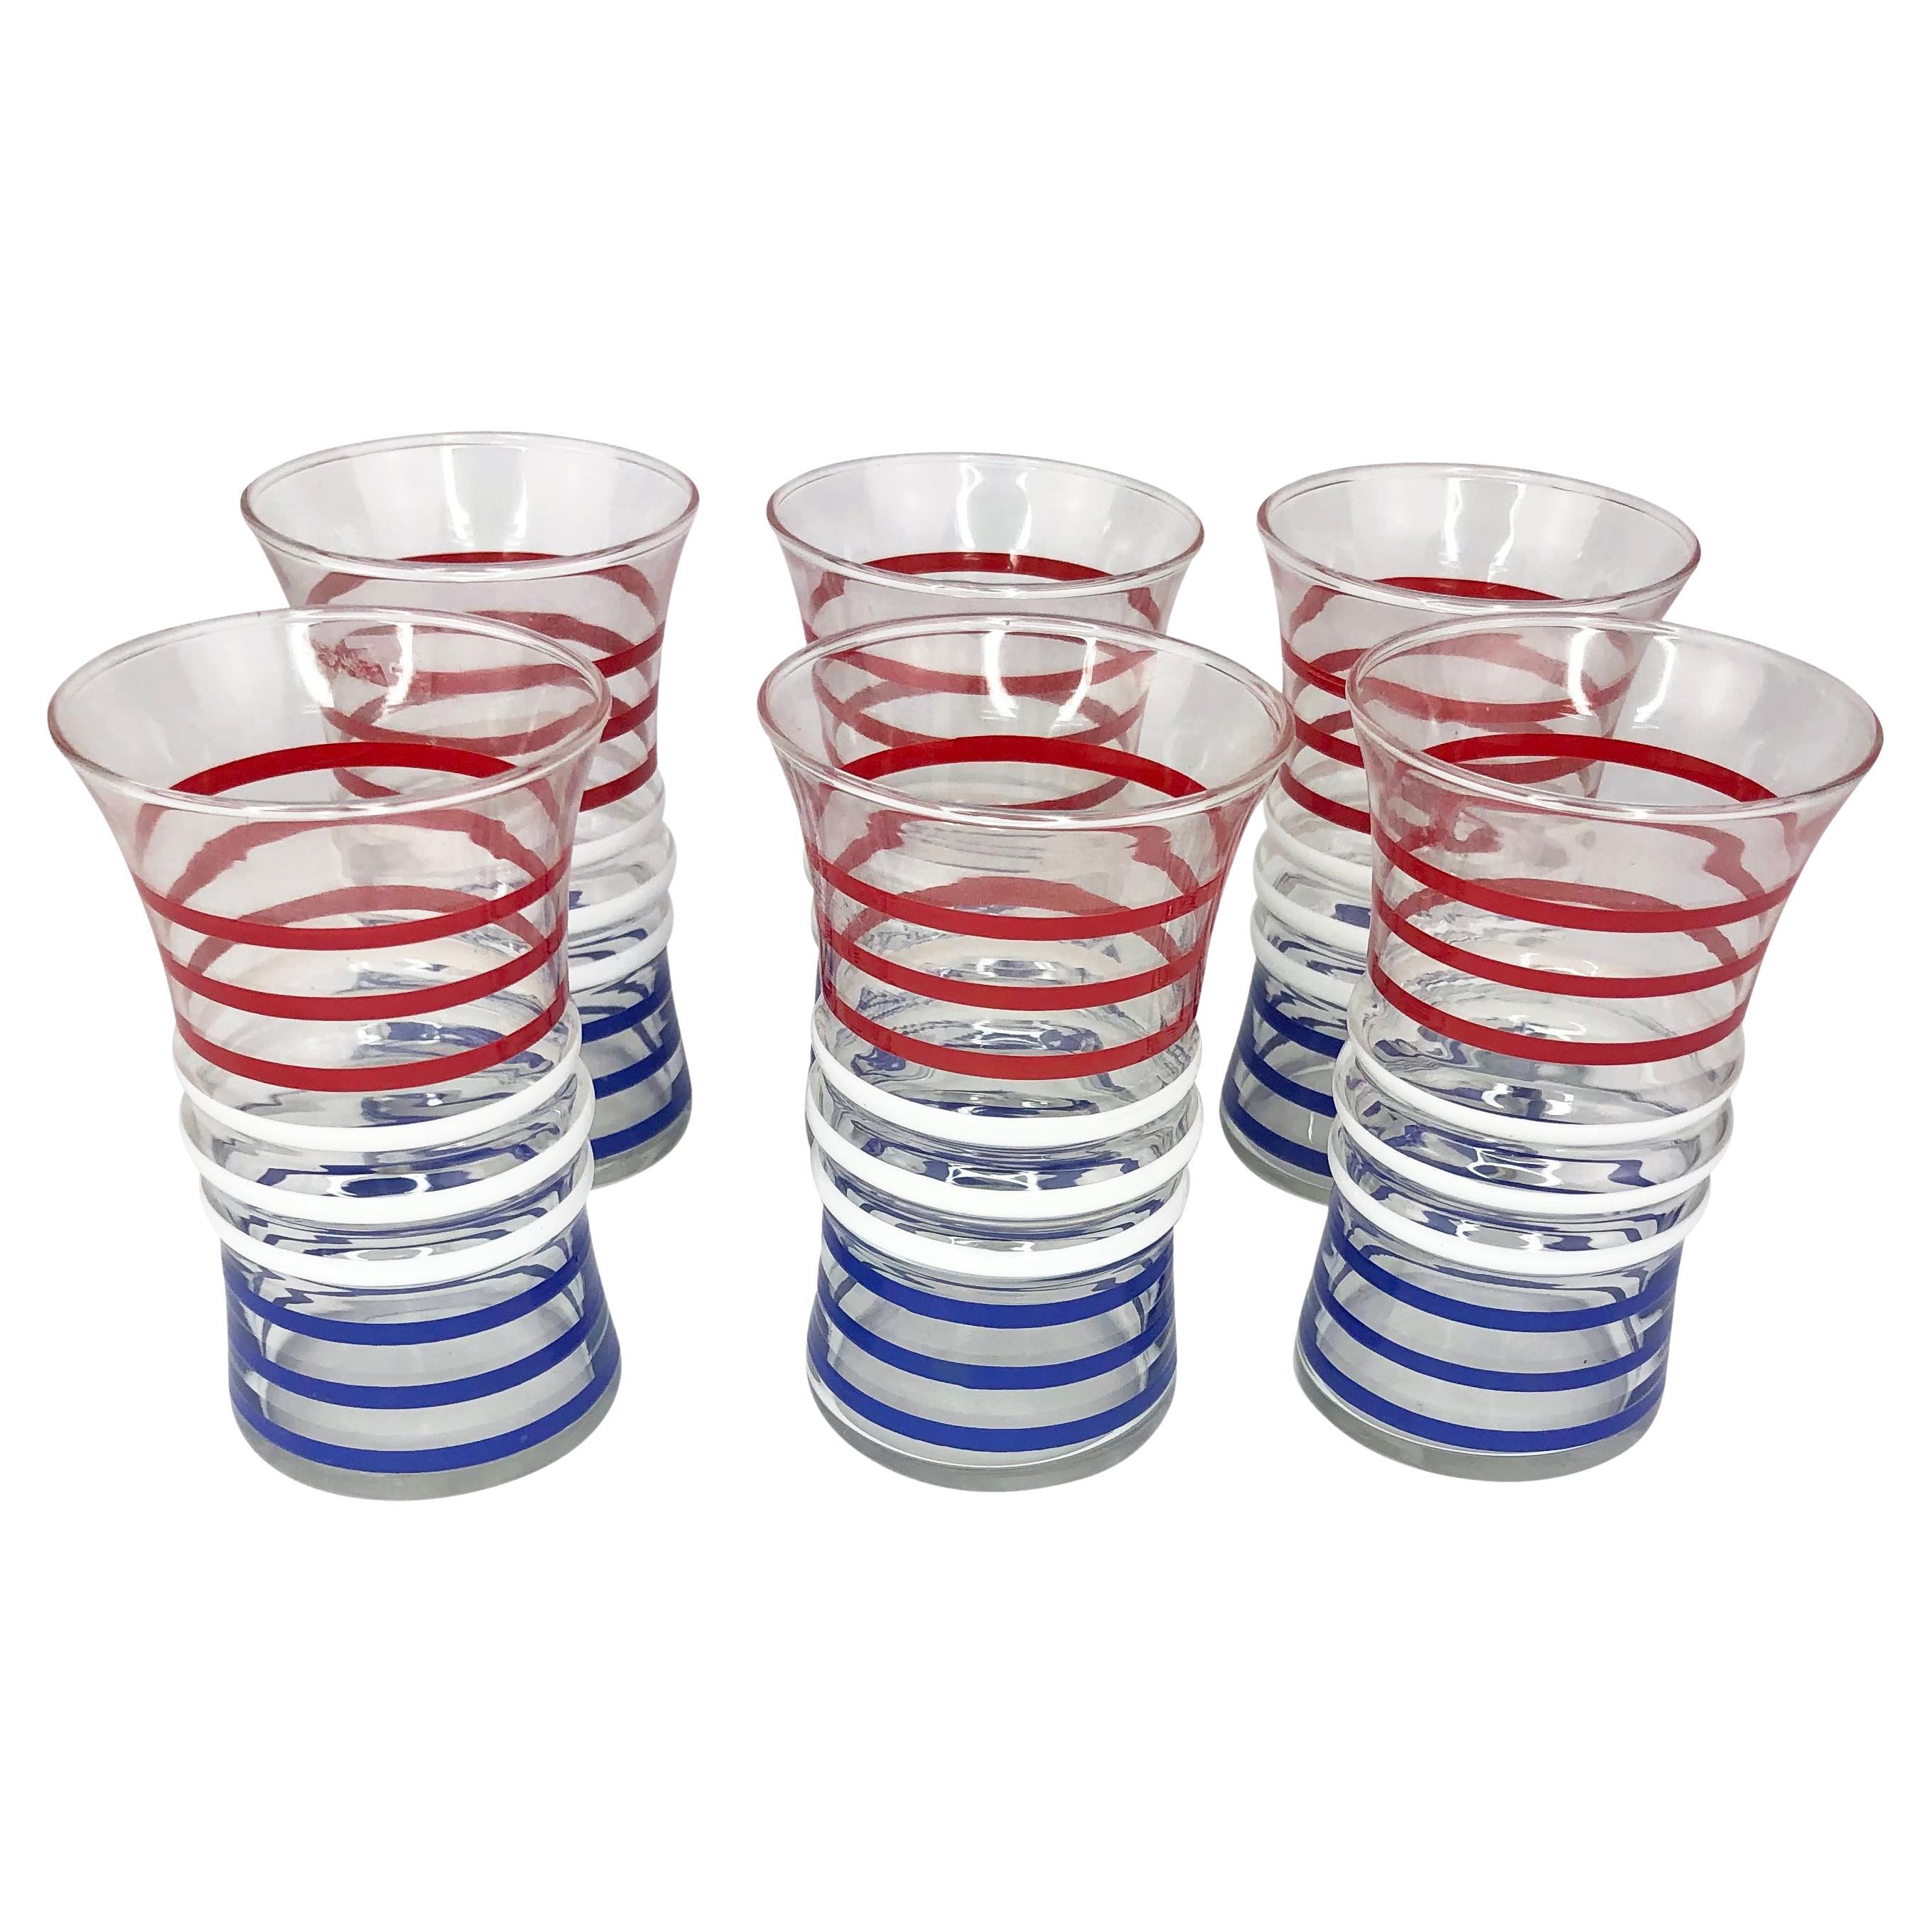 Vintage 4 oz Tumblers with Red, White, and Blue Bands - Set of 6 For Sale